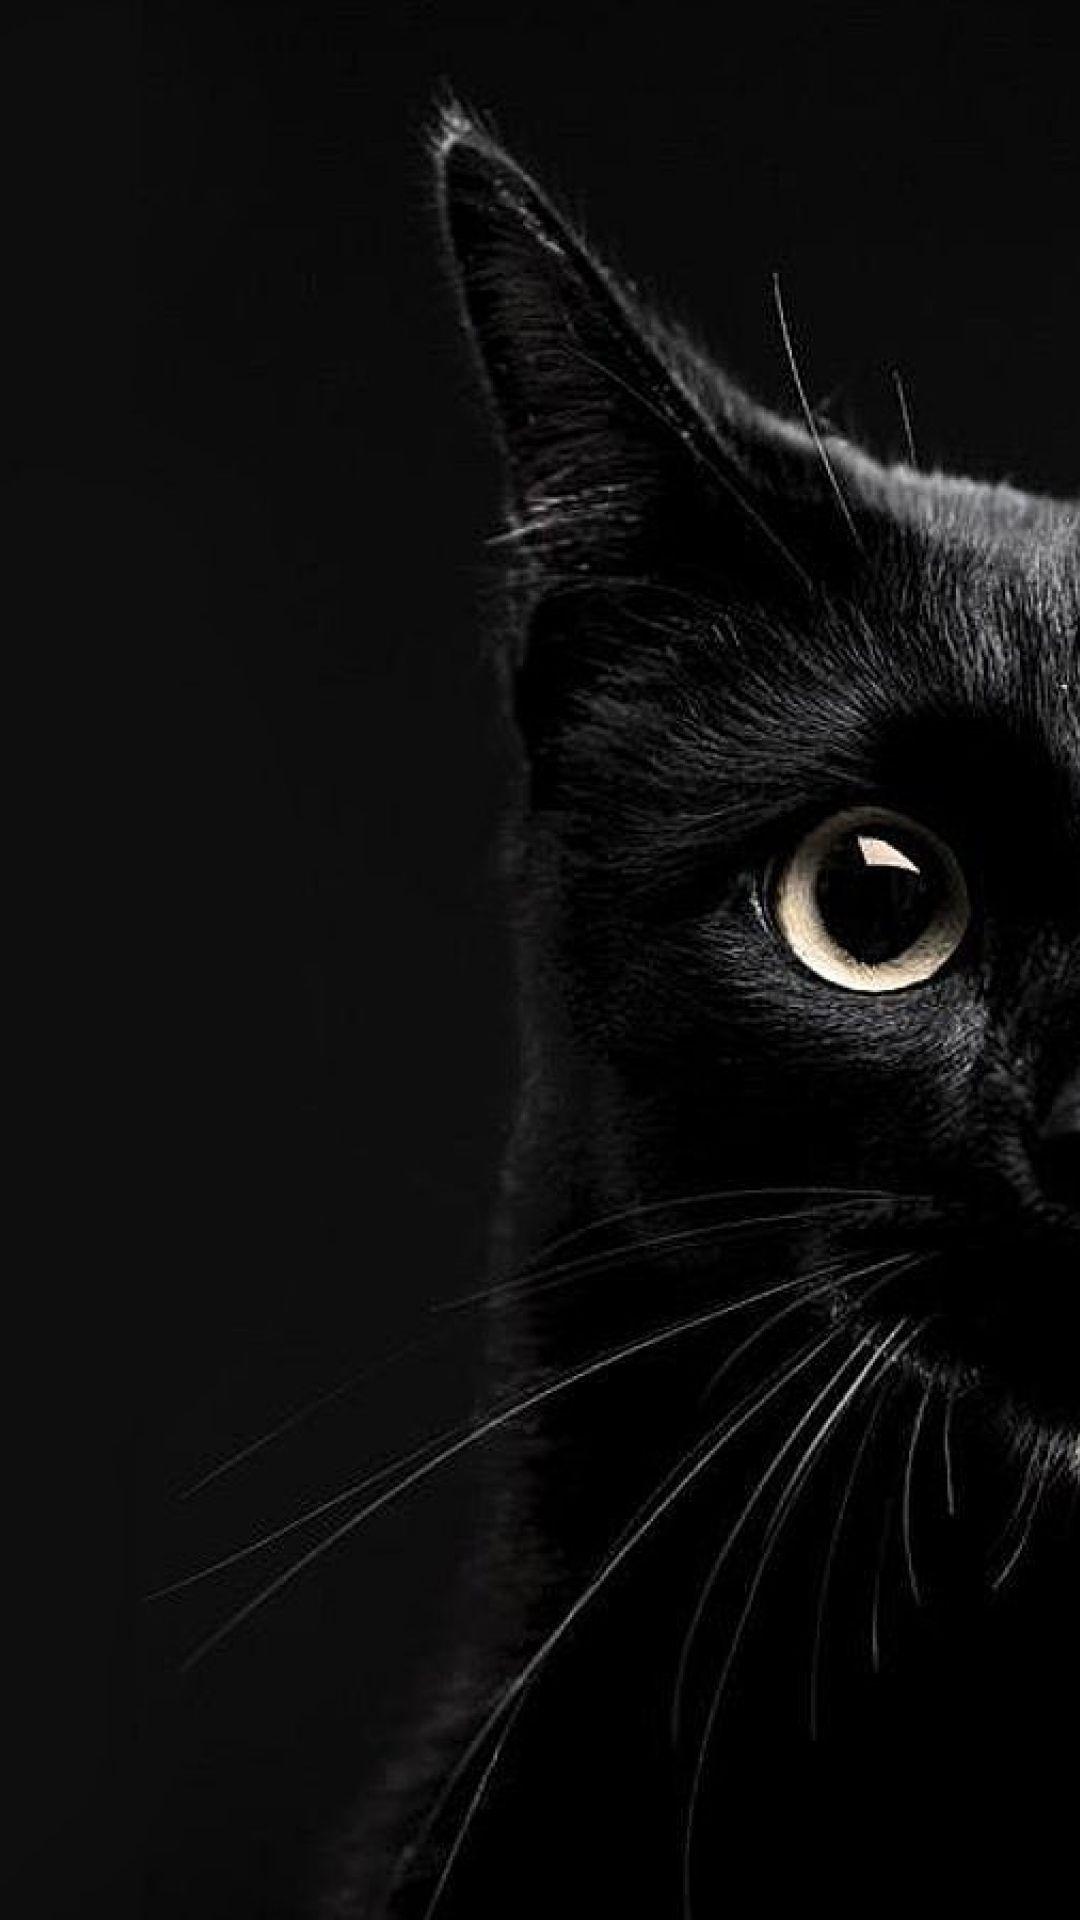 Black Cat Iphone Wallpapers Top Free Black Cat Iphone Backgrounds Wallpaperaccess